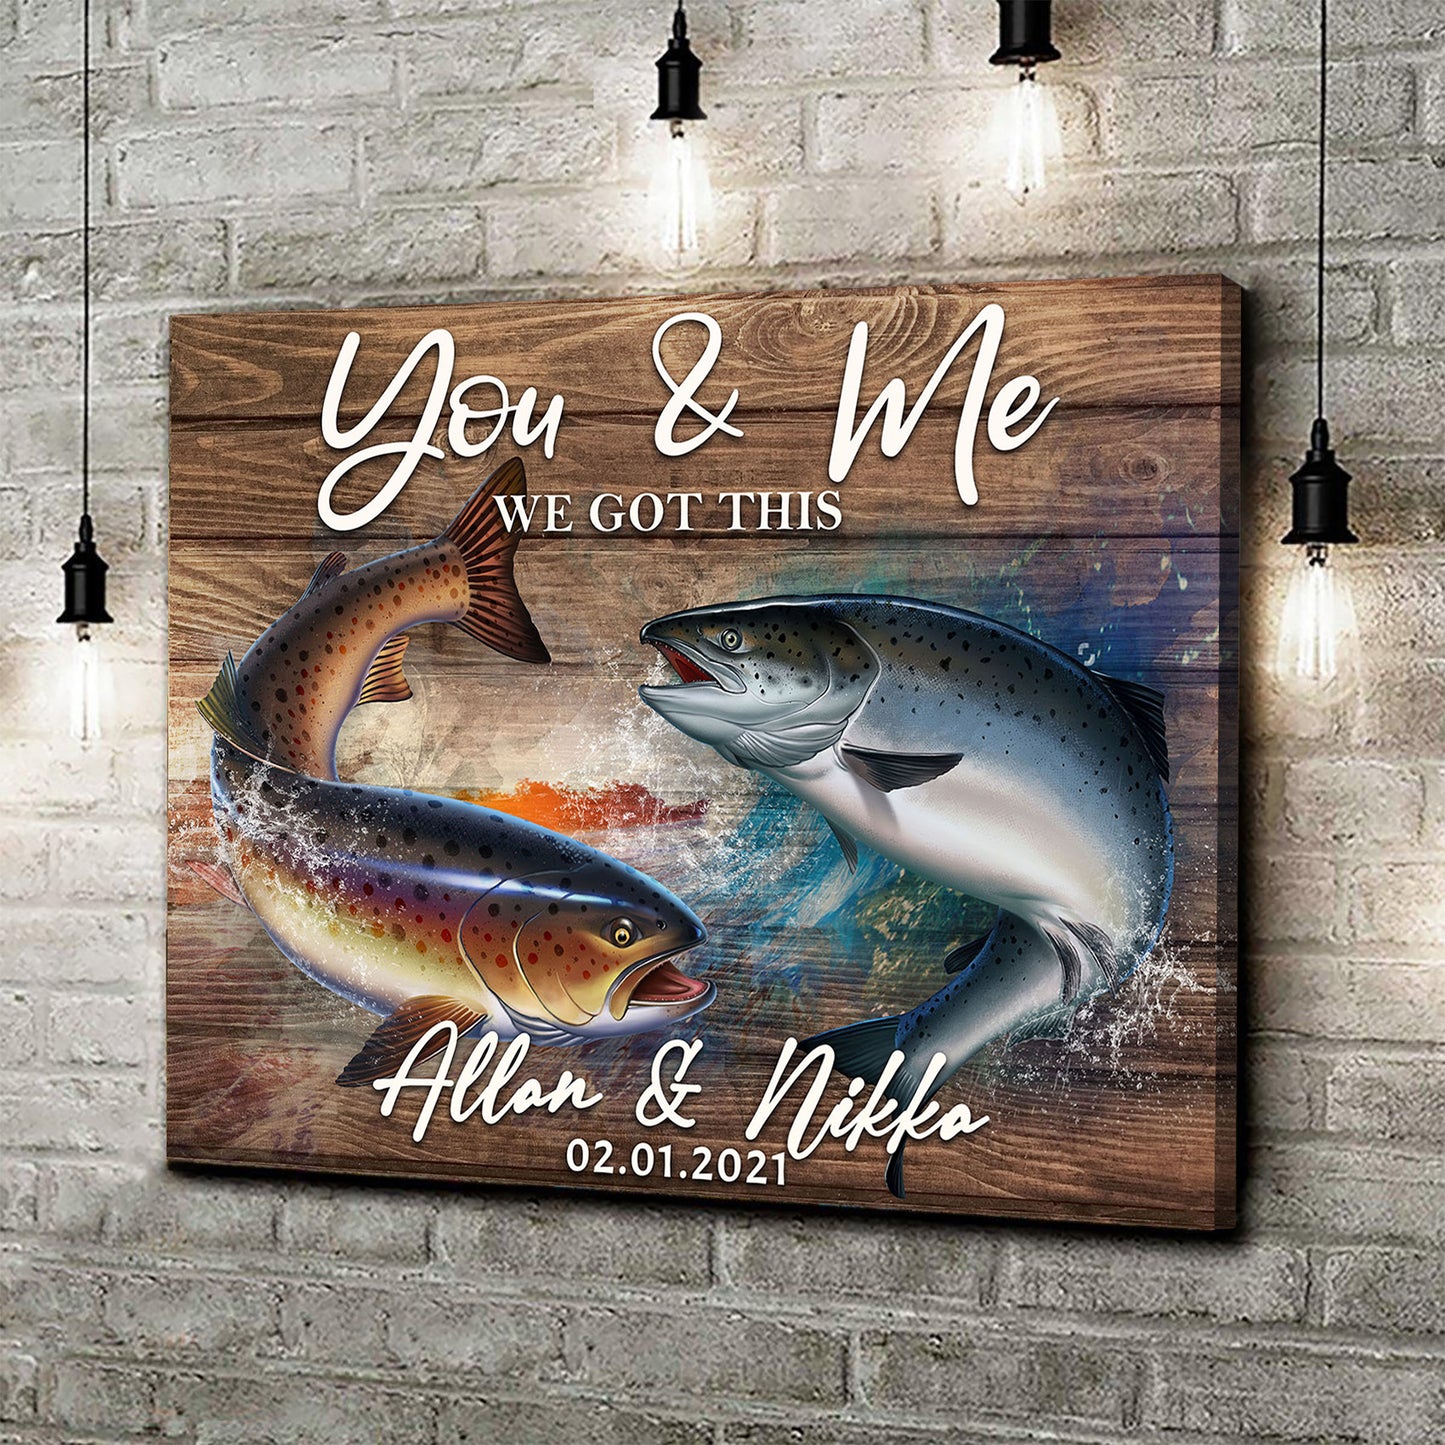 We Got This Couple Fish Sign - Image by Tailored Canvases